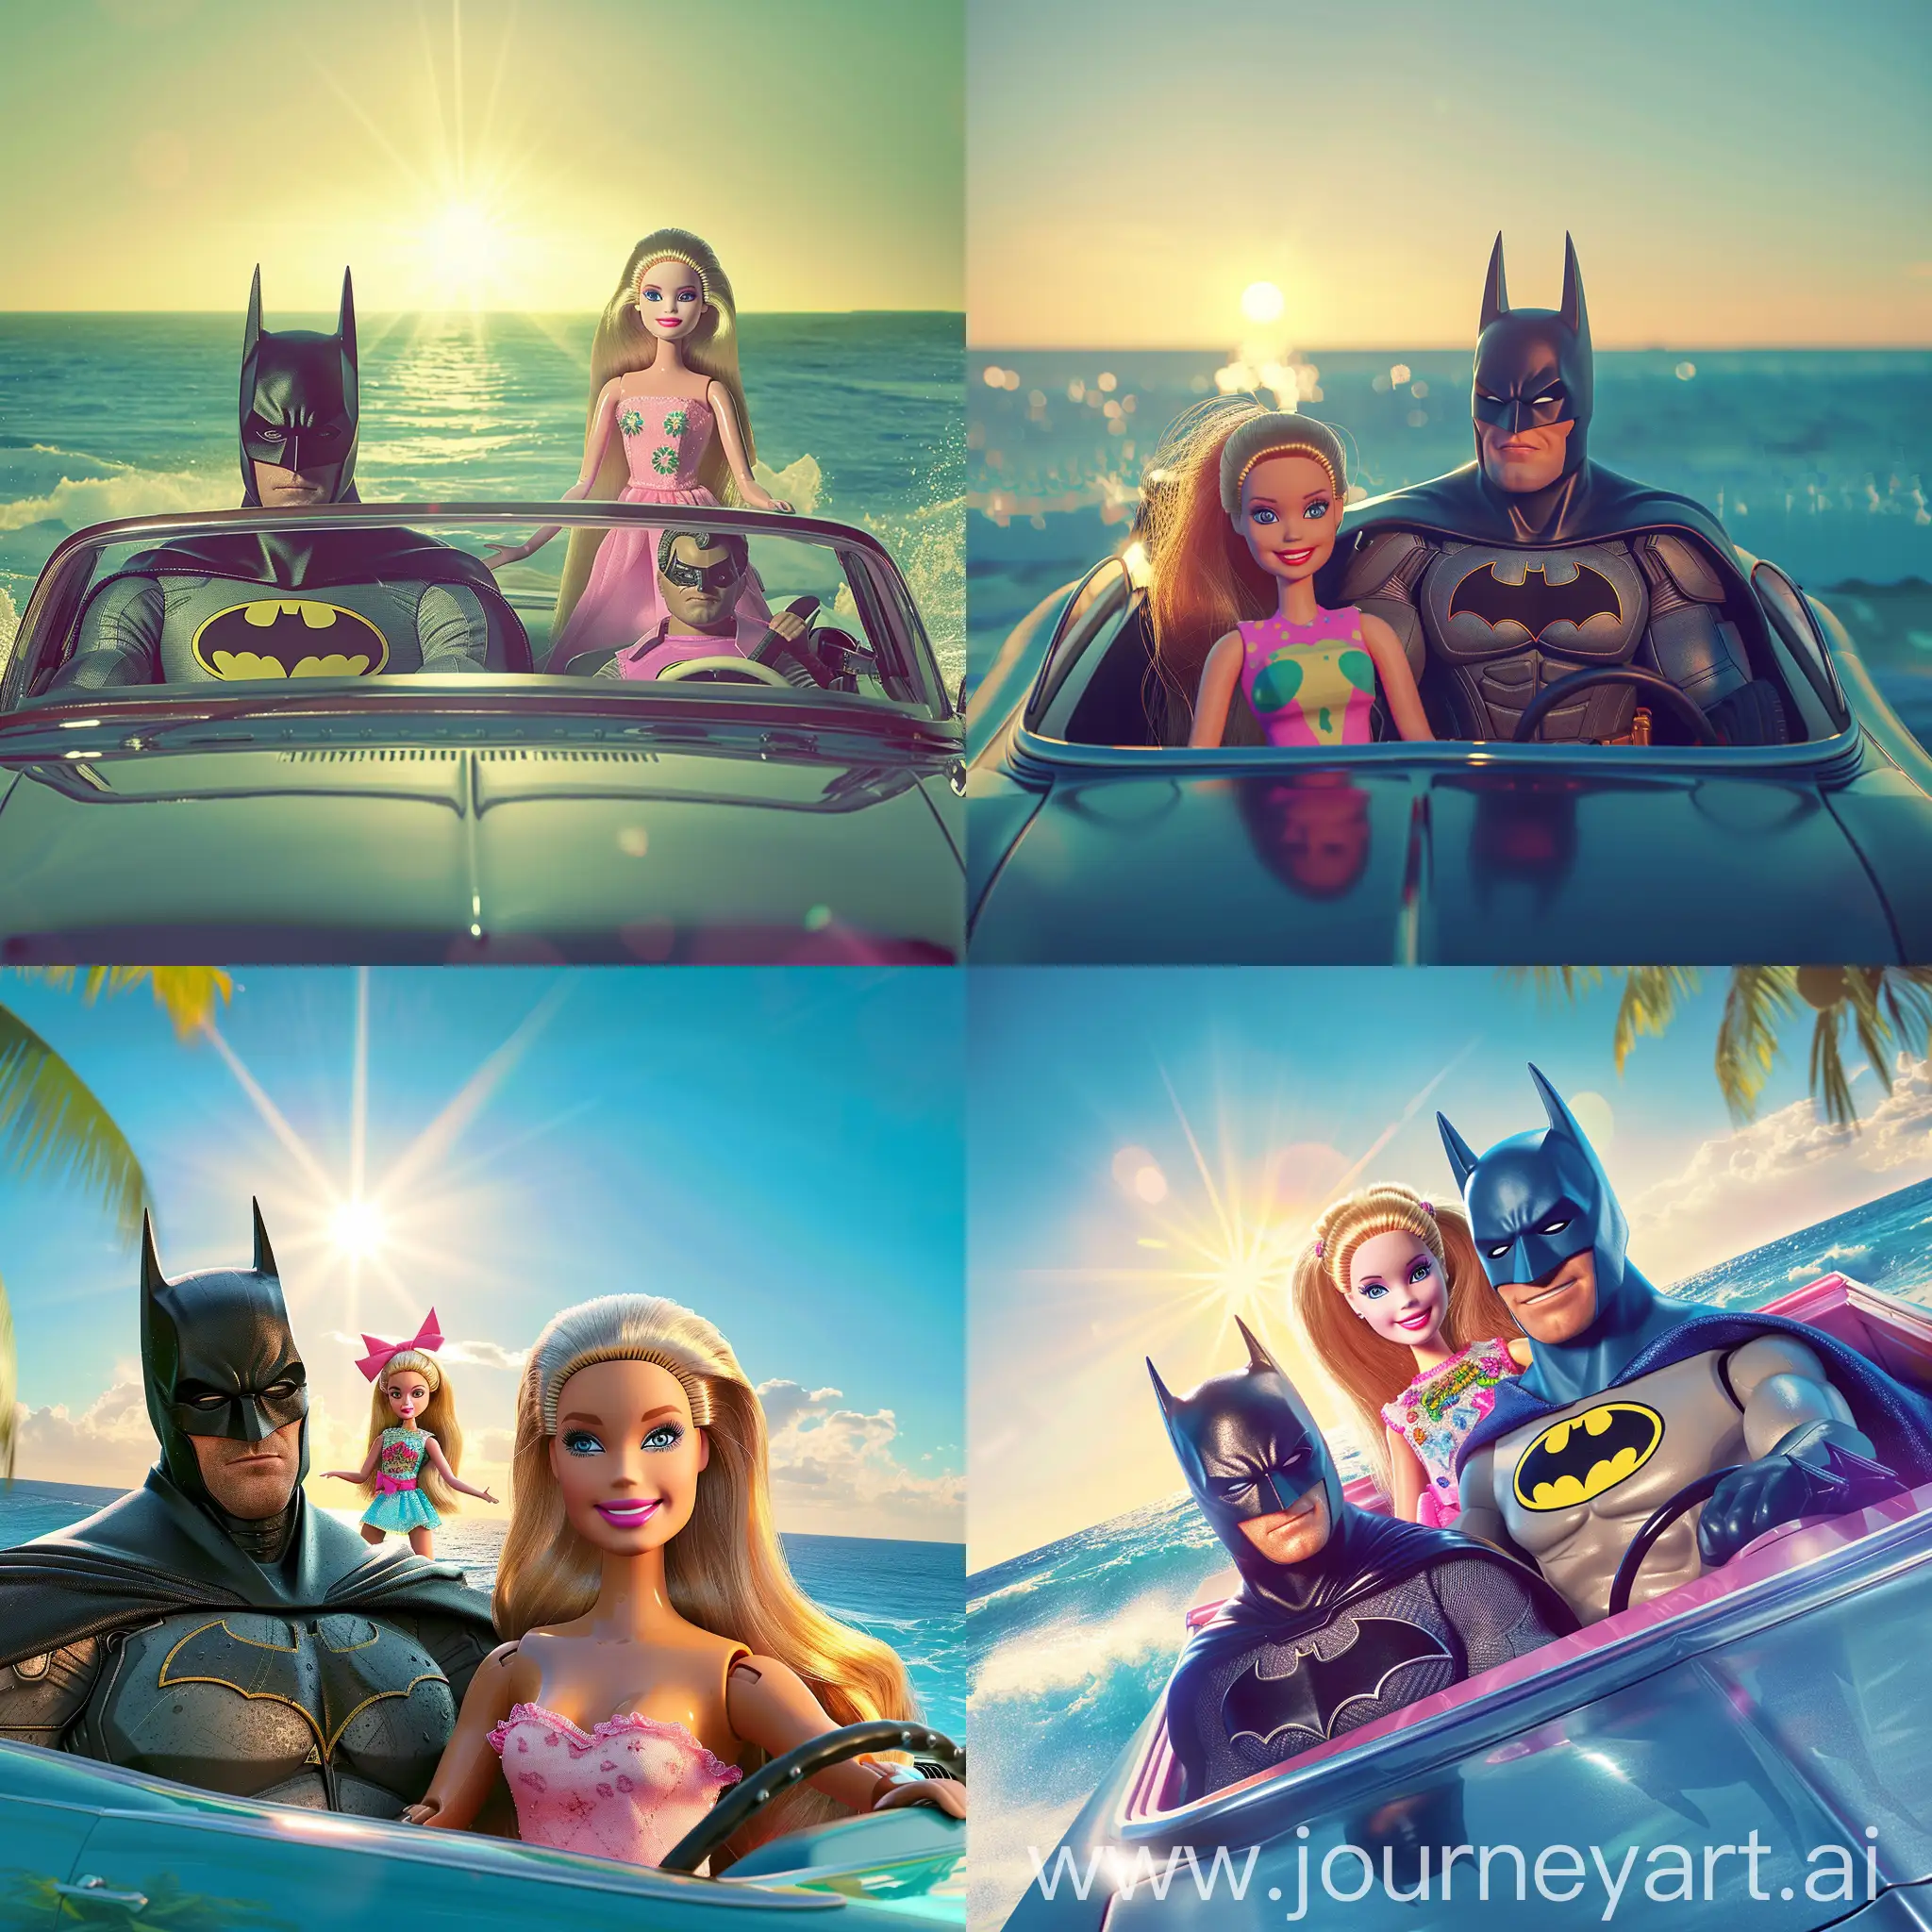 Batman and Barbie in a car against the backdrop of the sea and sun 
